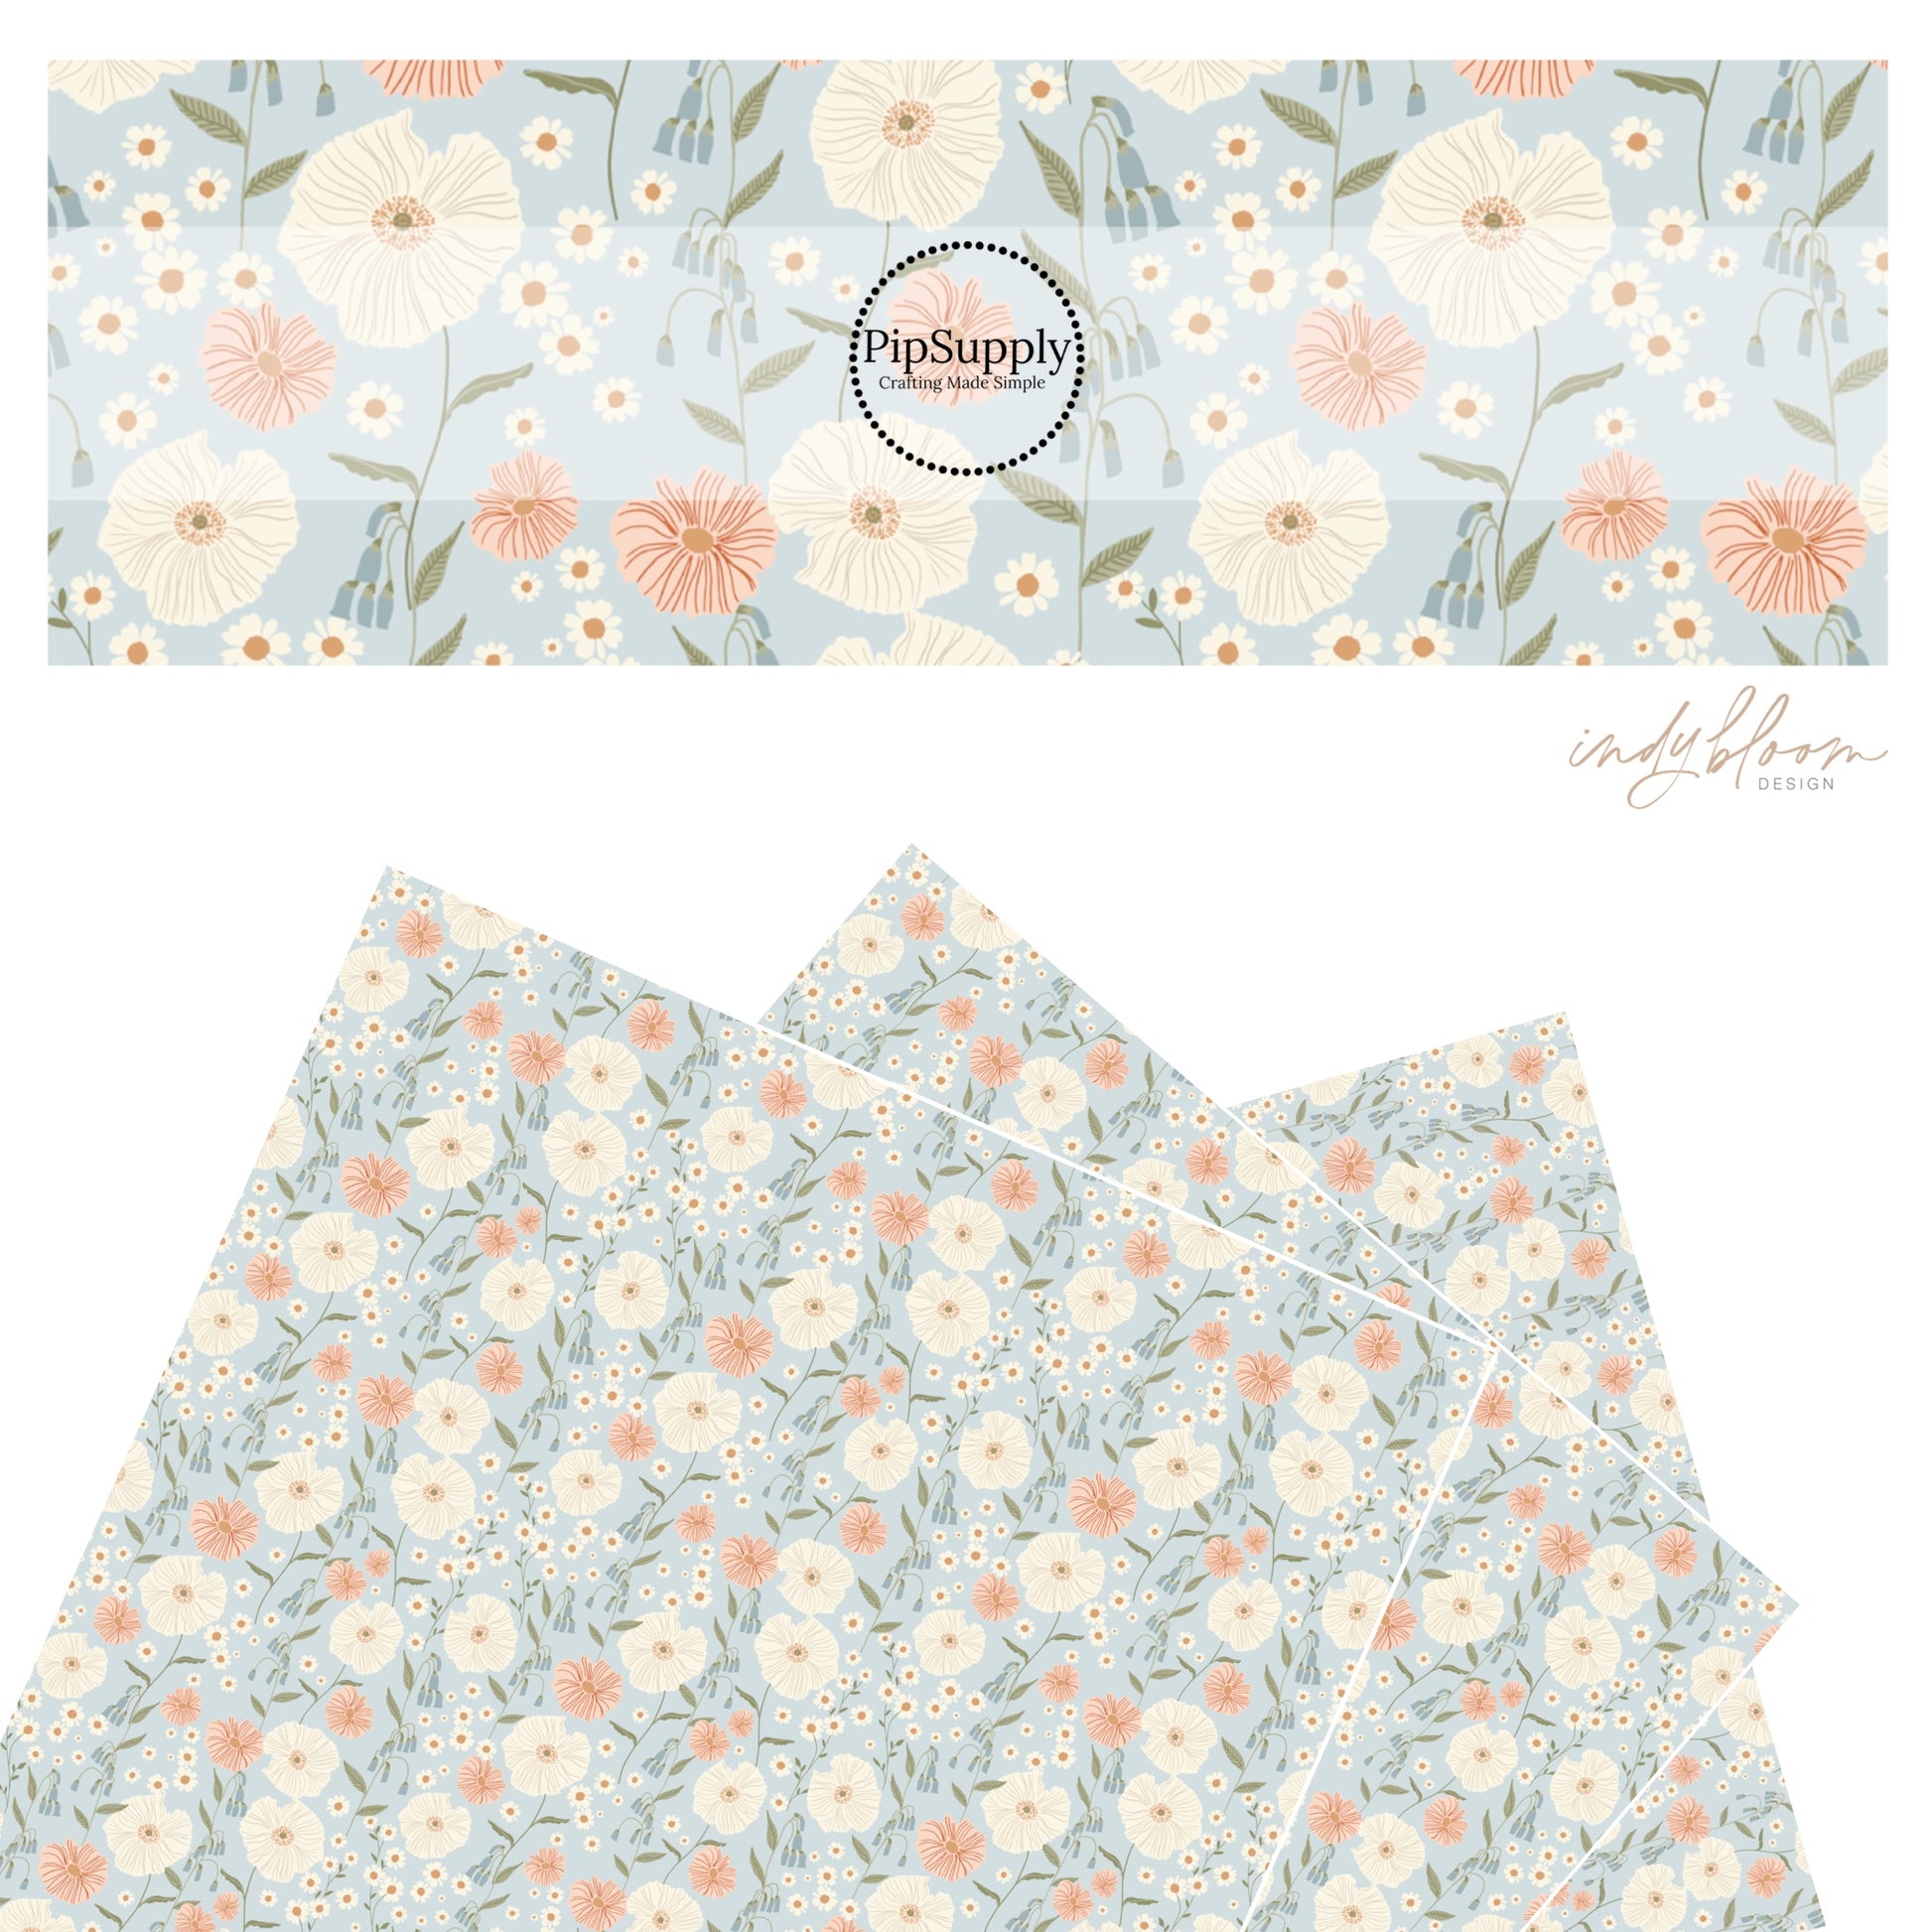 These pastel flowers in a meadow on light blue faux leather sheets contain the following design elements: tan, orange, cream, pink, and blush flowers.